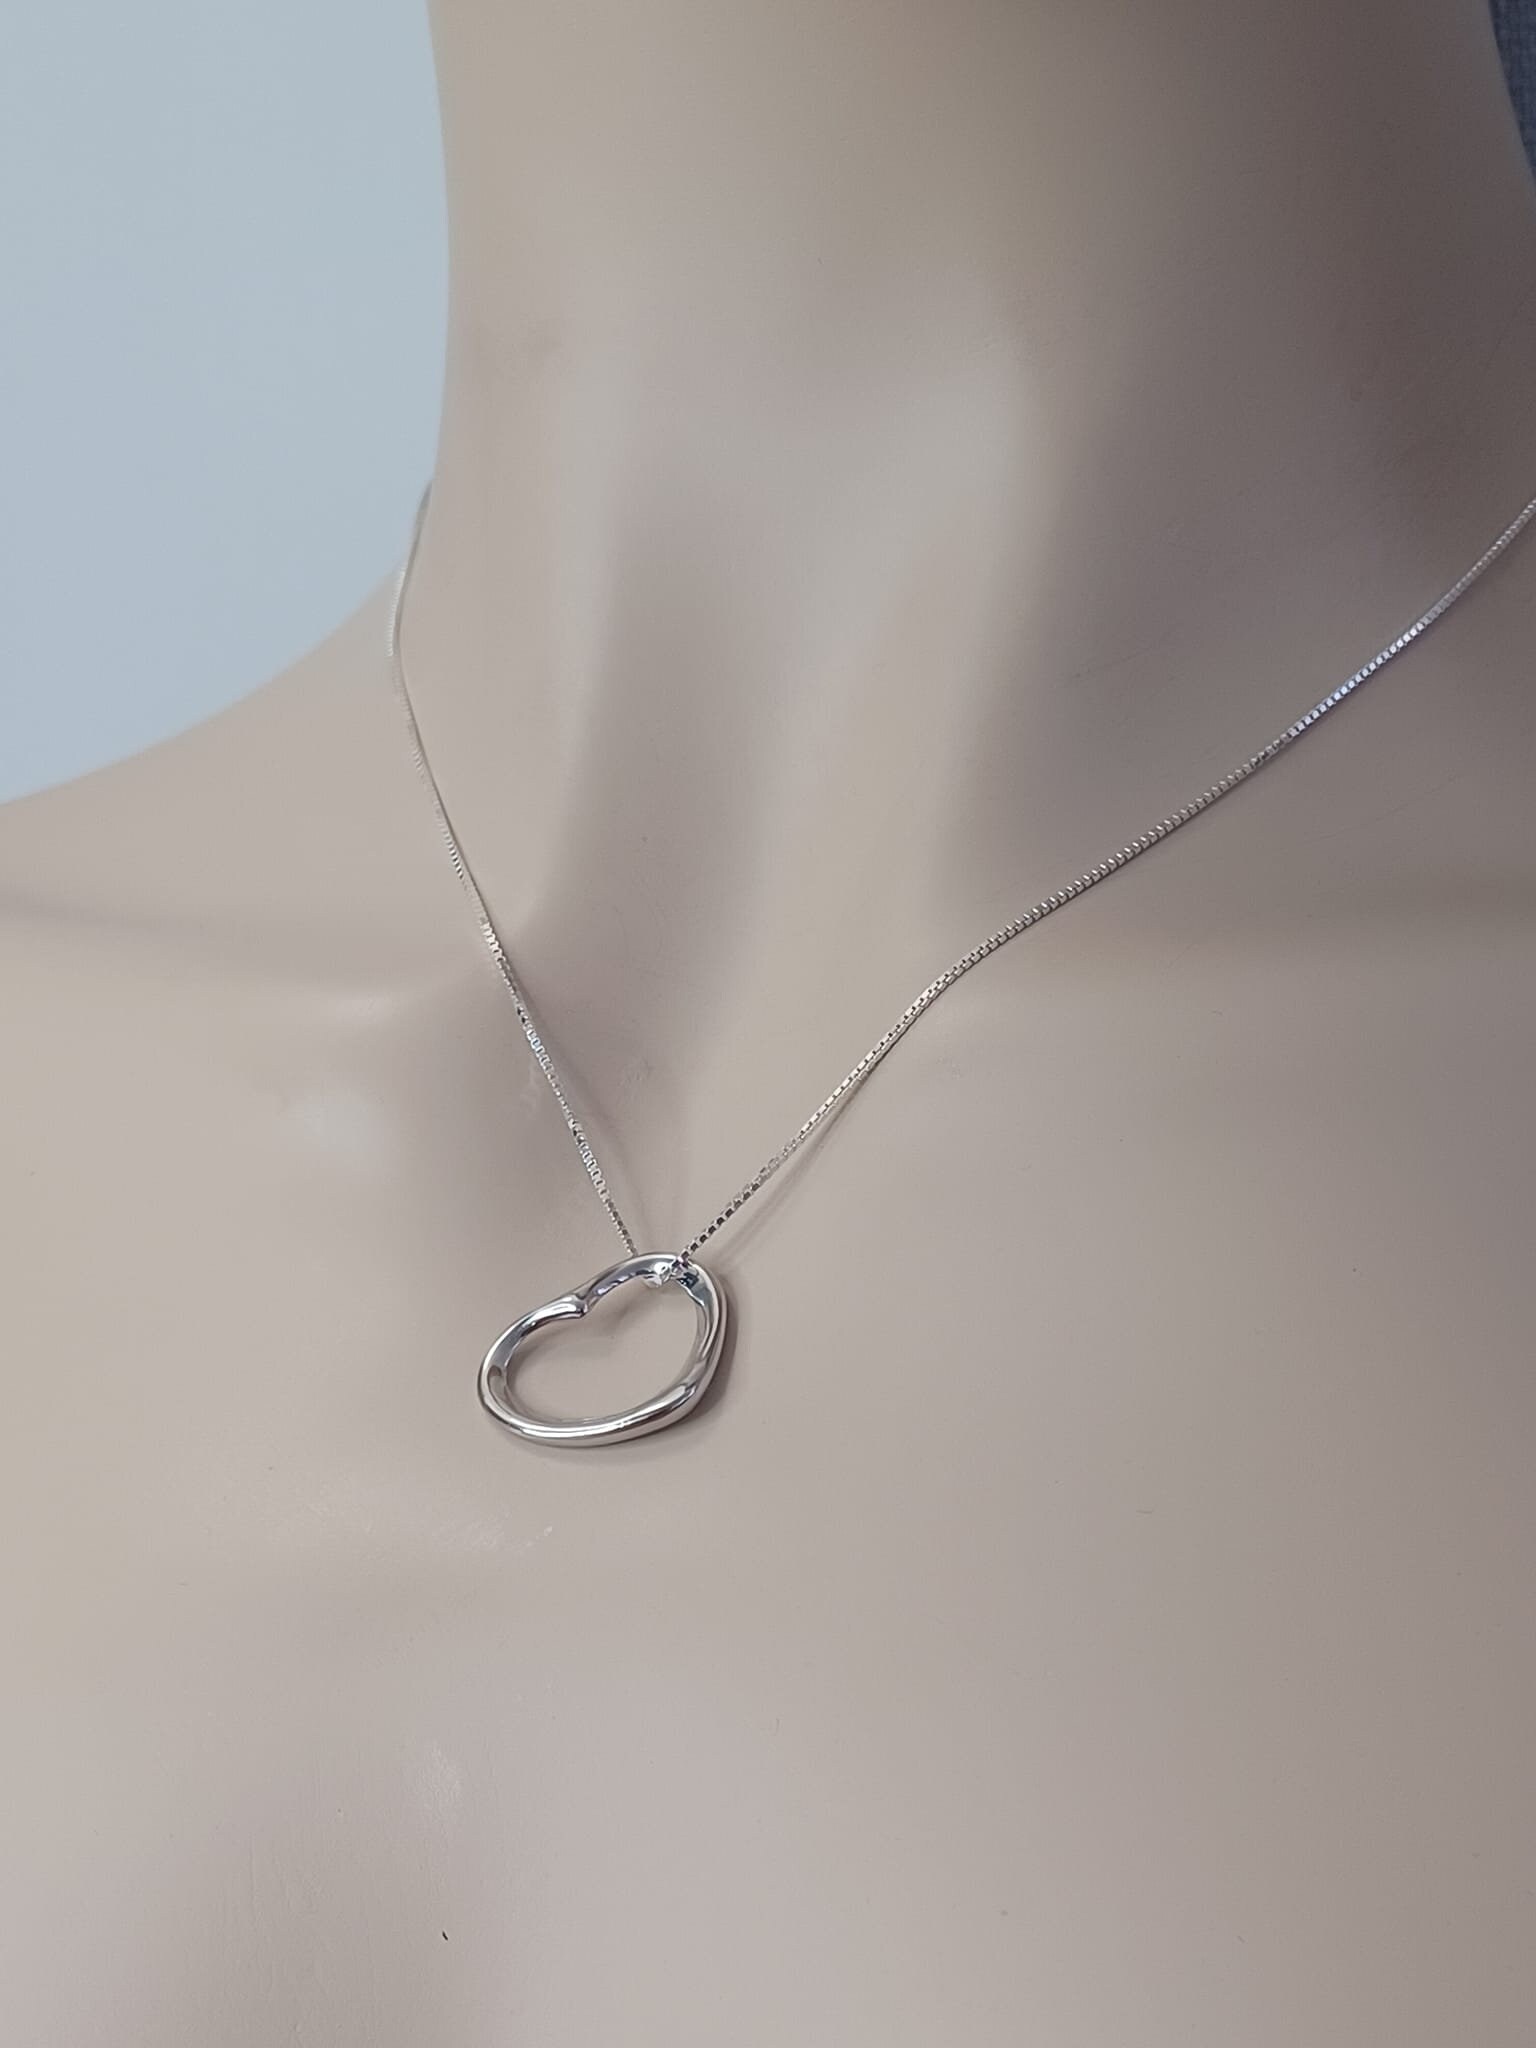 Tiny Heart Necklace, Sterling Silver Heart Pendant, Minimalist Layering  Silver Jewelry, Dainty Heart Love Necklace, Mom and Girlfriend Gift - Etsy